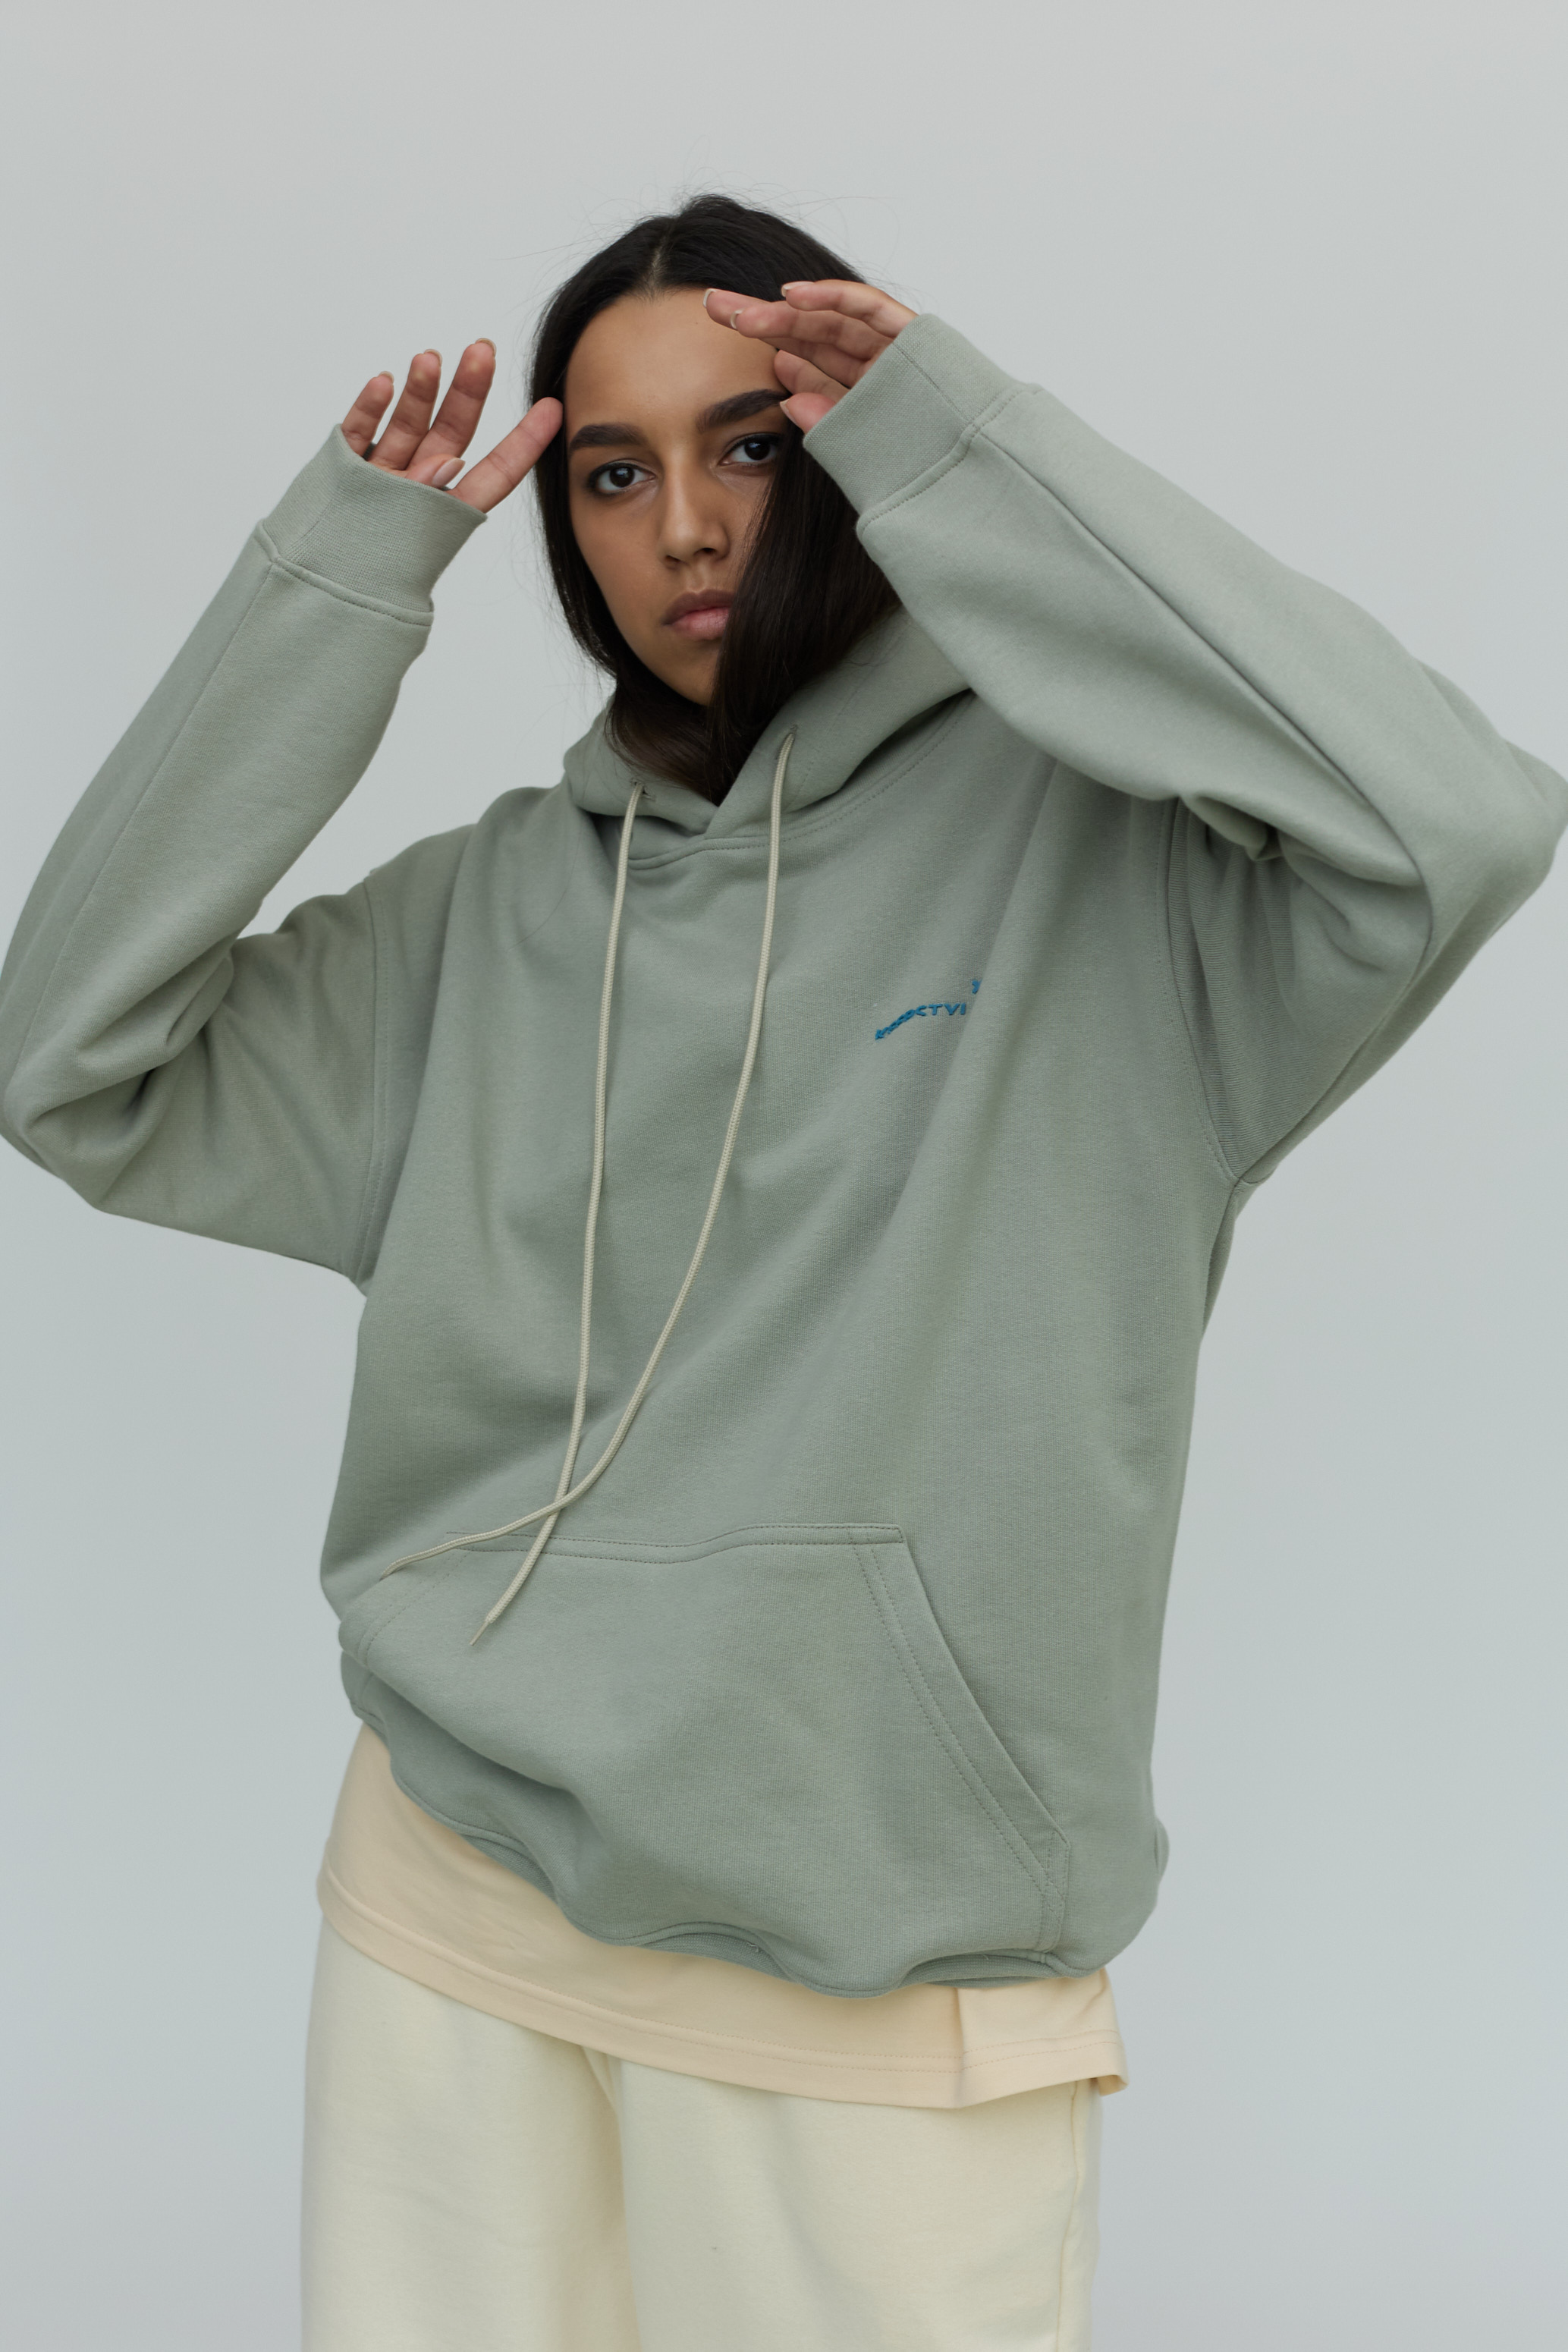 logo hoodie in forest color